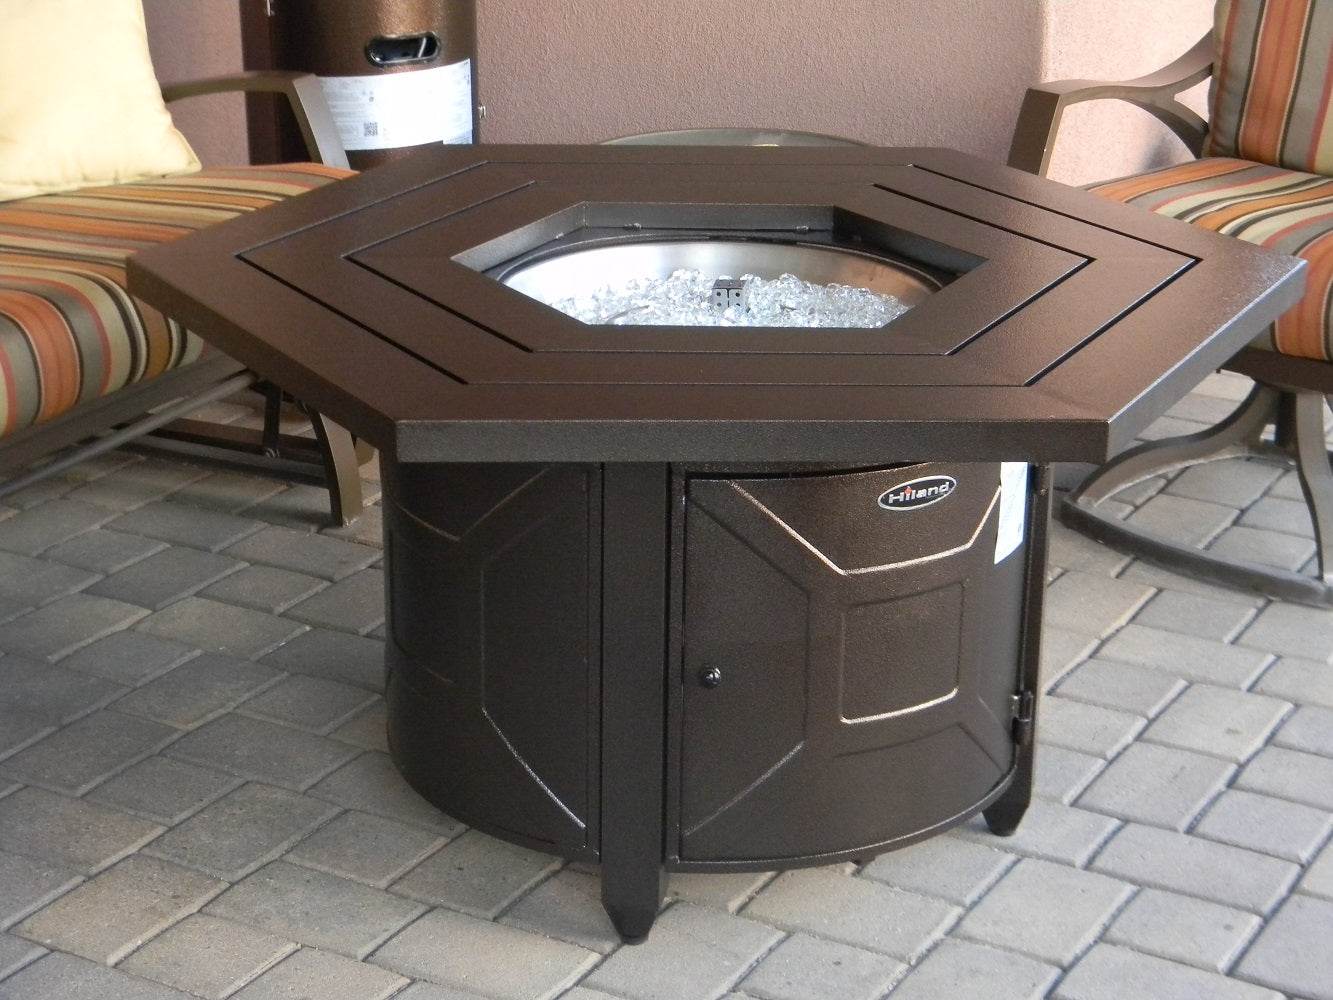 Hiland Hexagon Fire Pit -Hammered Bronze- F-HEX-FPT- Lifestyle Patio Lid Open